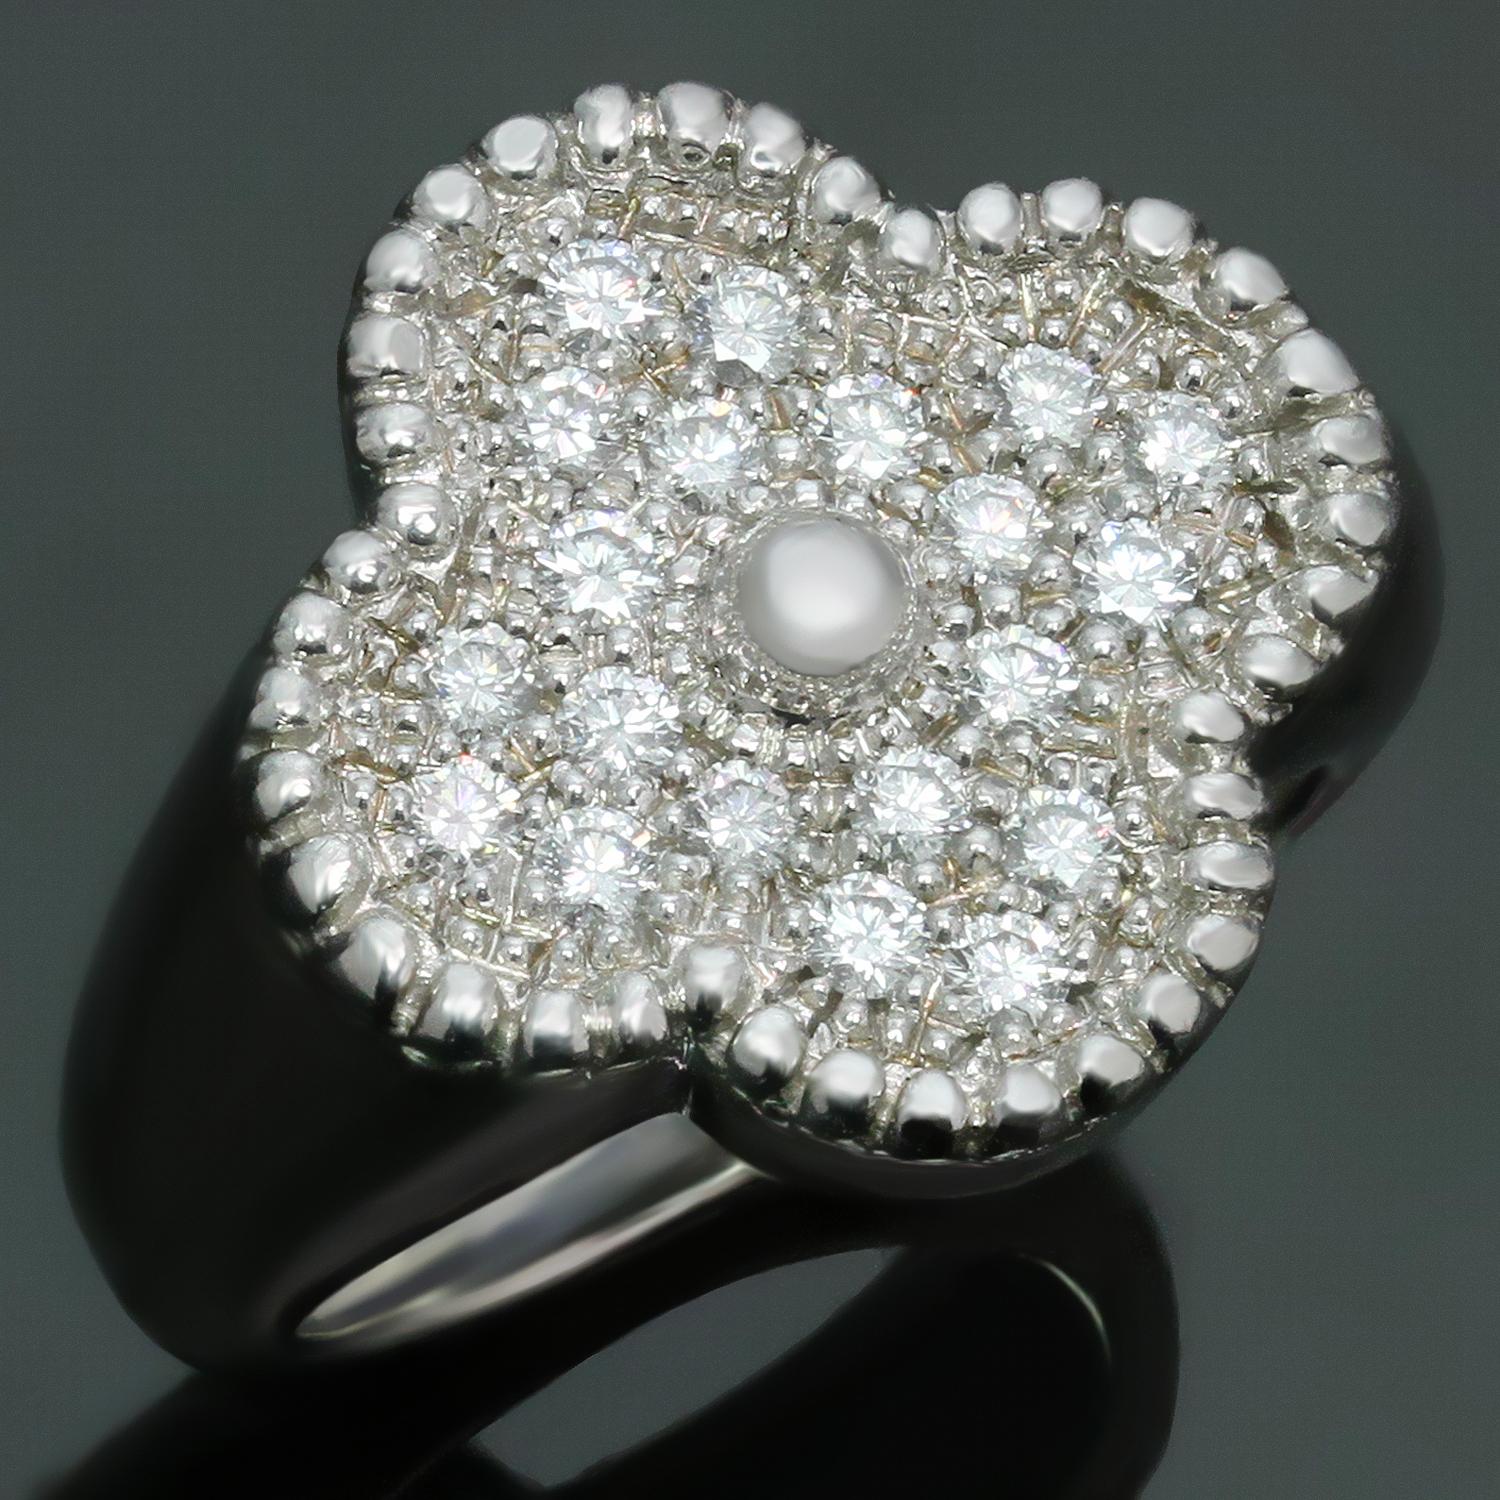 This gorgeous Van Cleef & Arpels ring from the iconic Vintage Alhambra collection features the lucky clover design crafted in 18k white gold and pave-set with brilliant-cut round diamonds of an estimated 0.75 carats. Made in France circa 2000s.